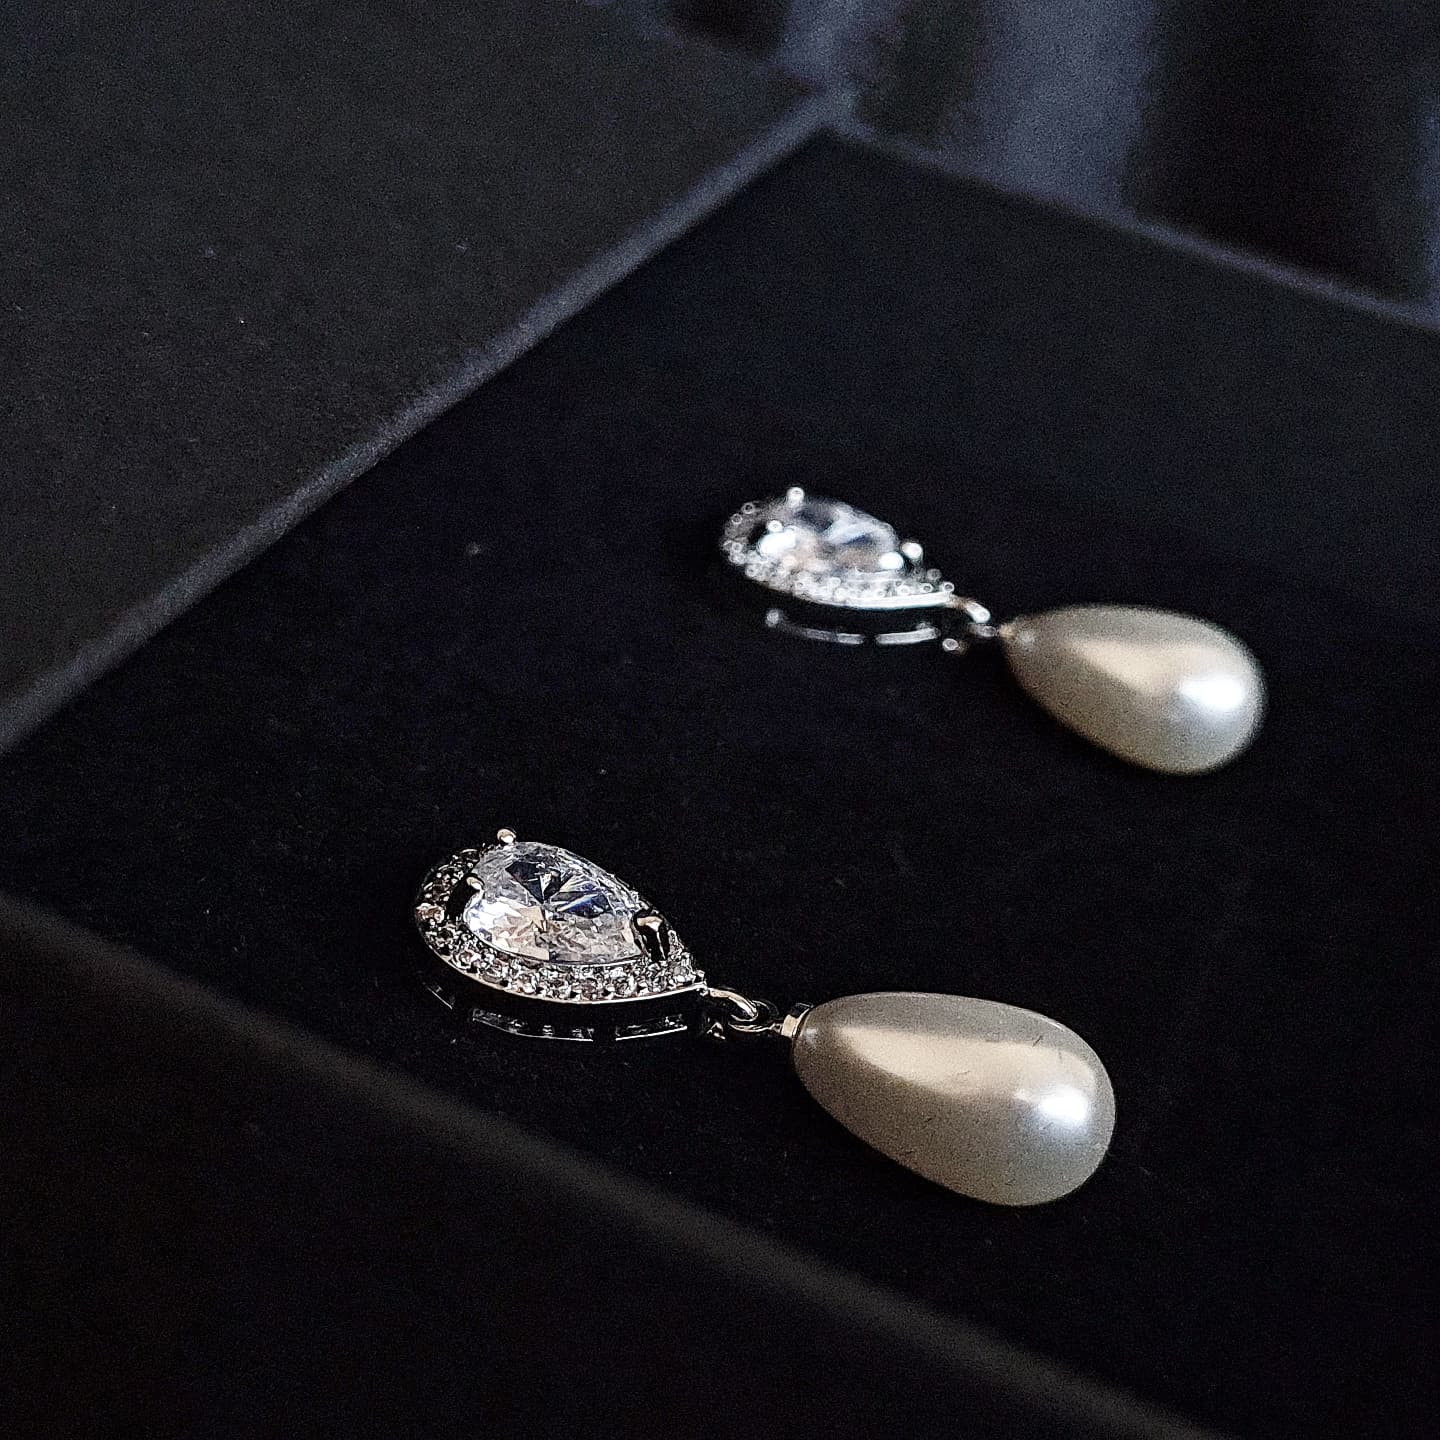 A pair of silver earrings with pearls and diamonds on a black box. The earrings are teardrop-shaped and have a simple, elegant design. The pearls are white and the diamonds are clear. 